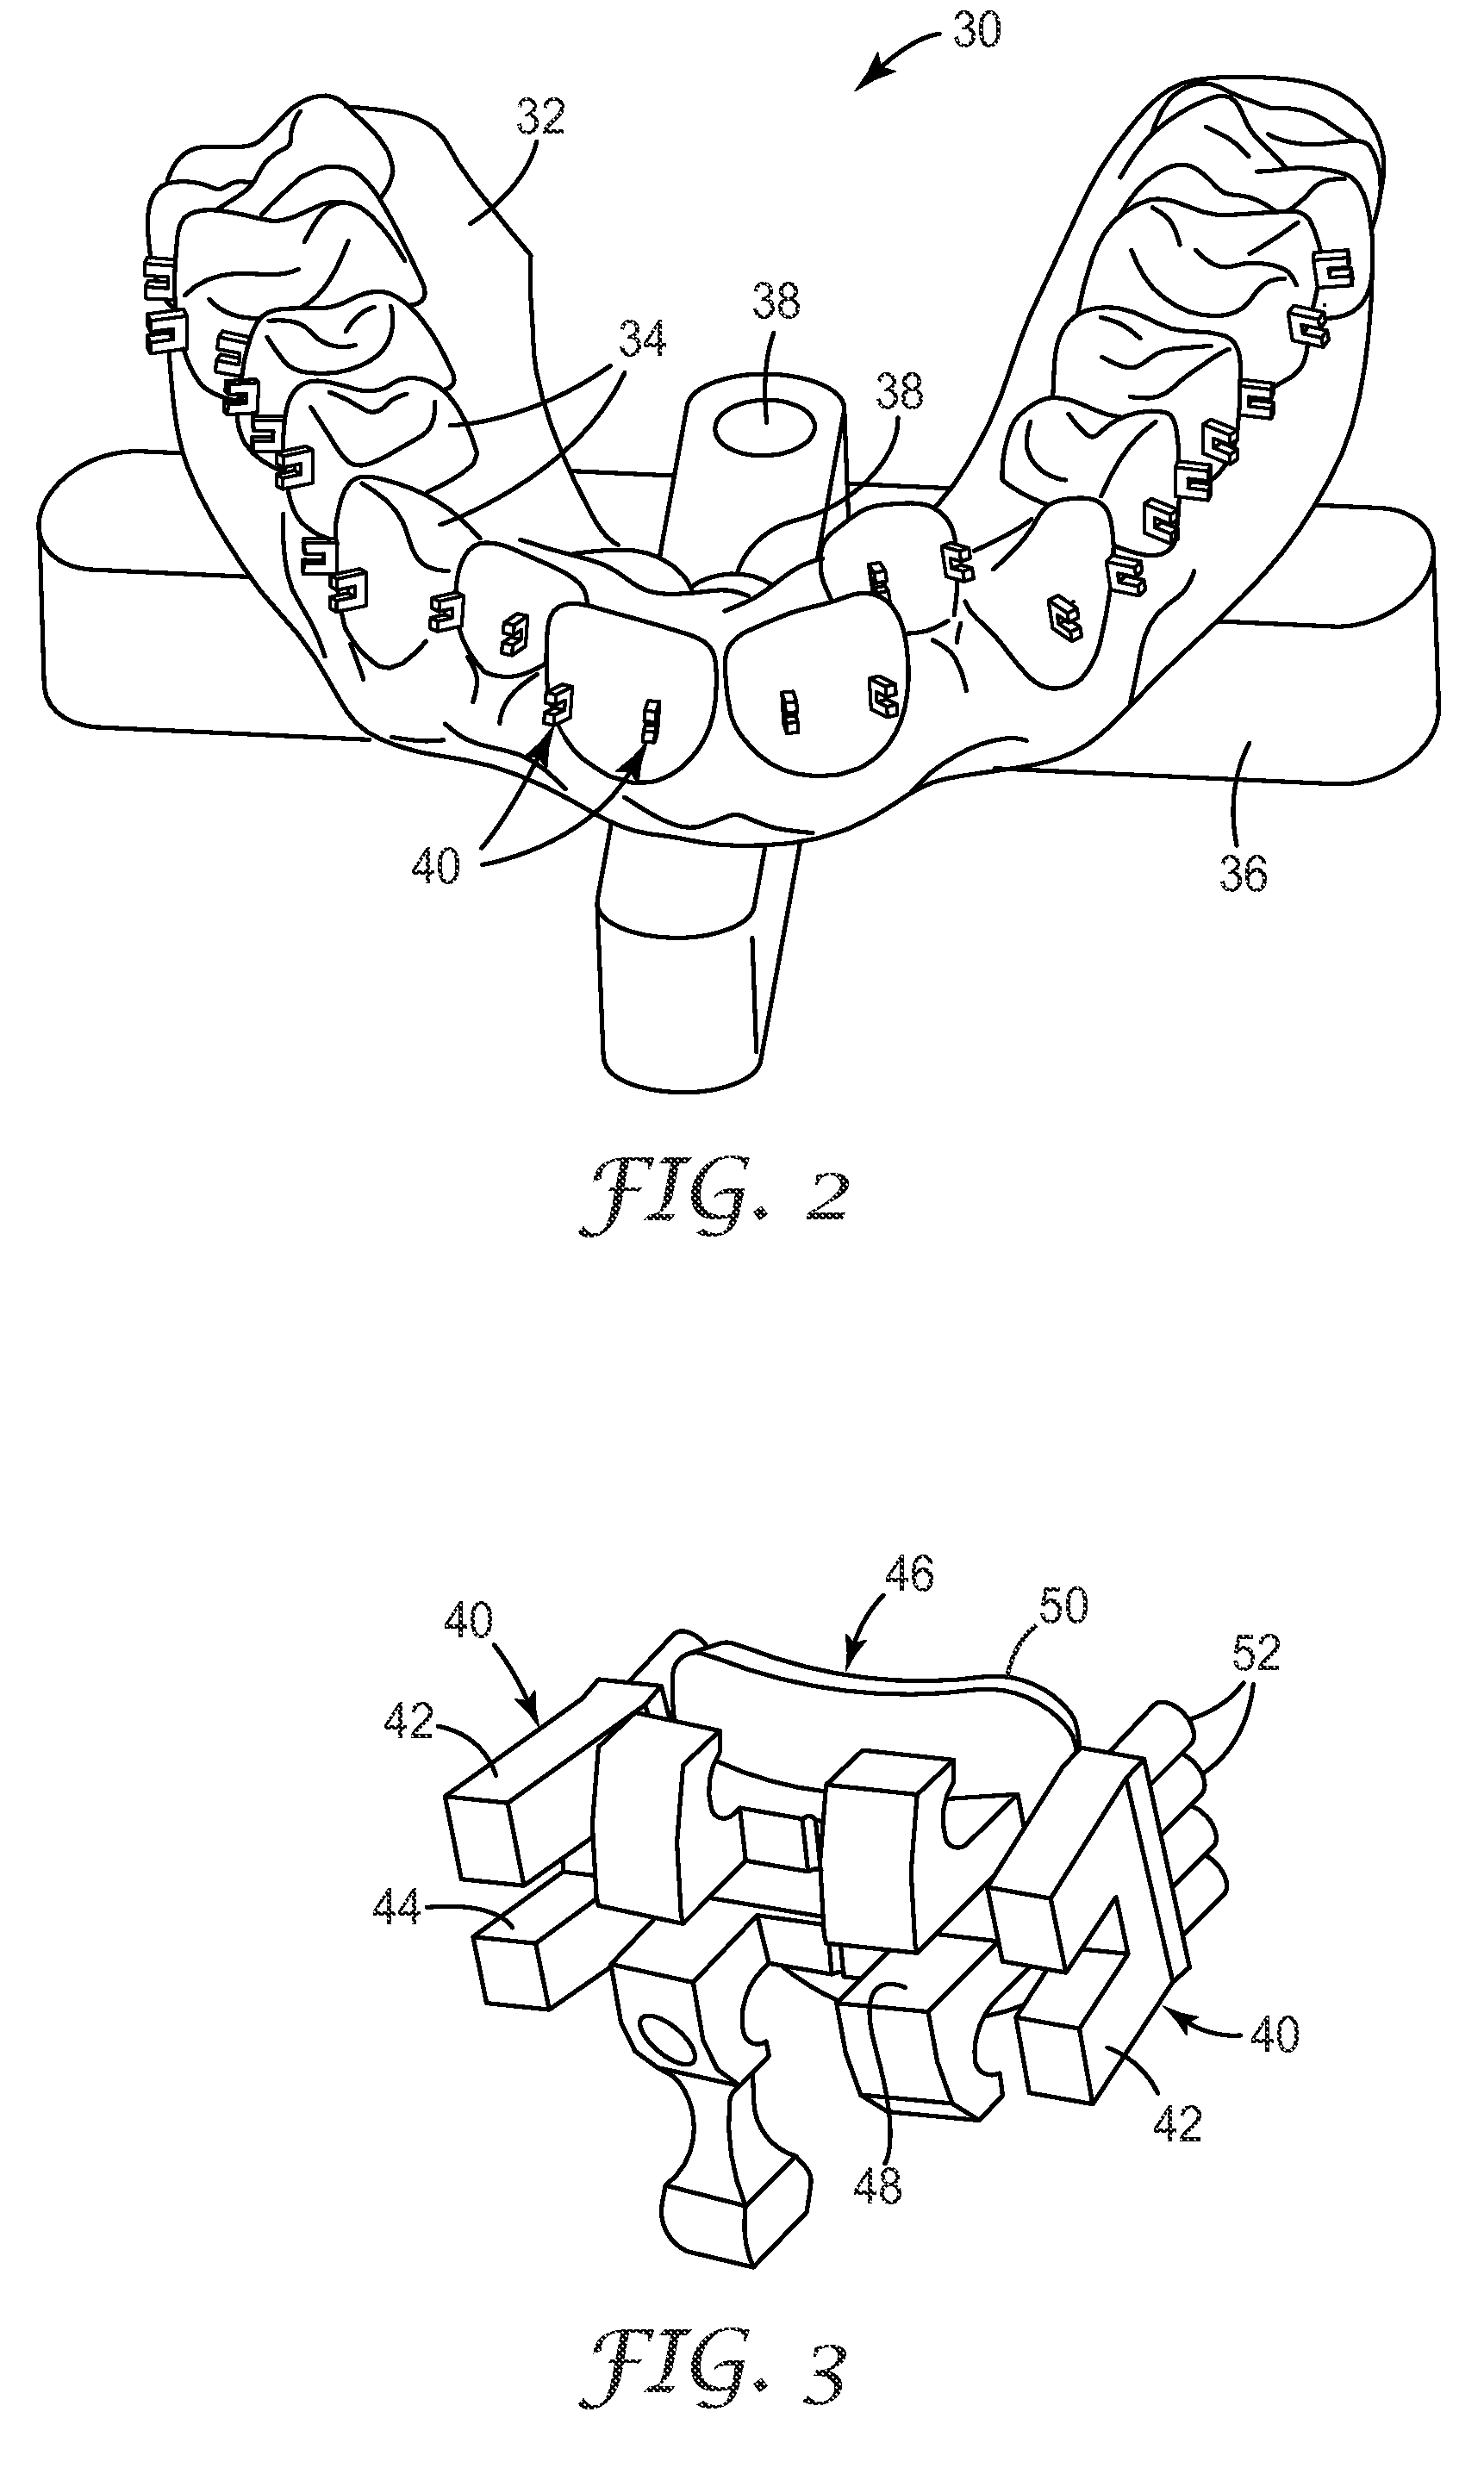 Indirect bonding trays for orthodontic treatment and methods for making the same